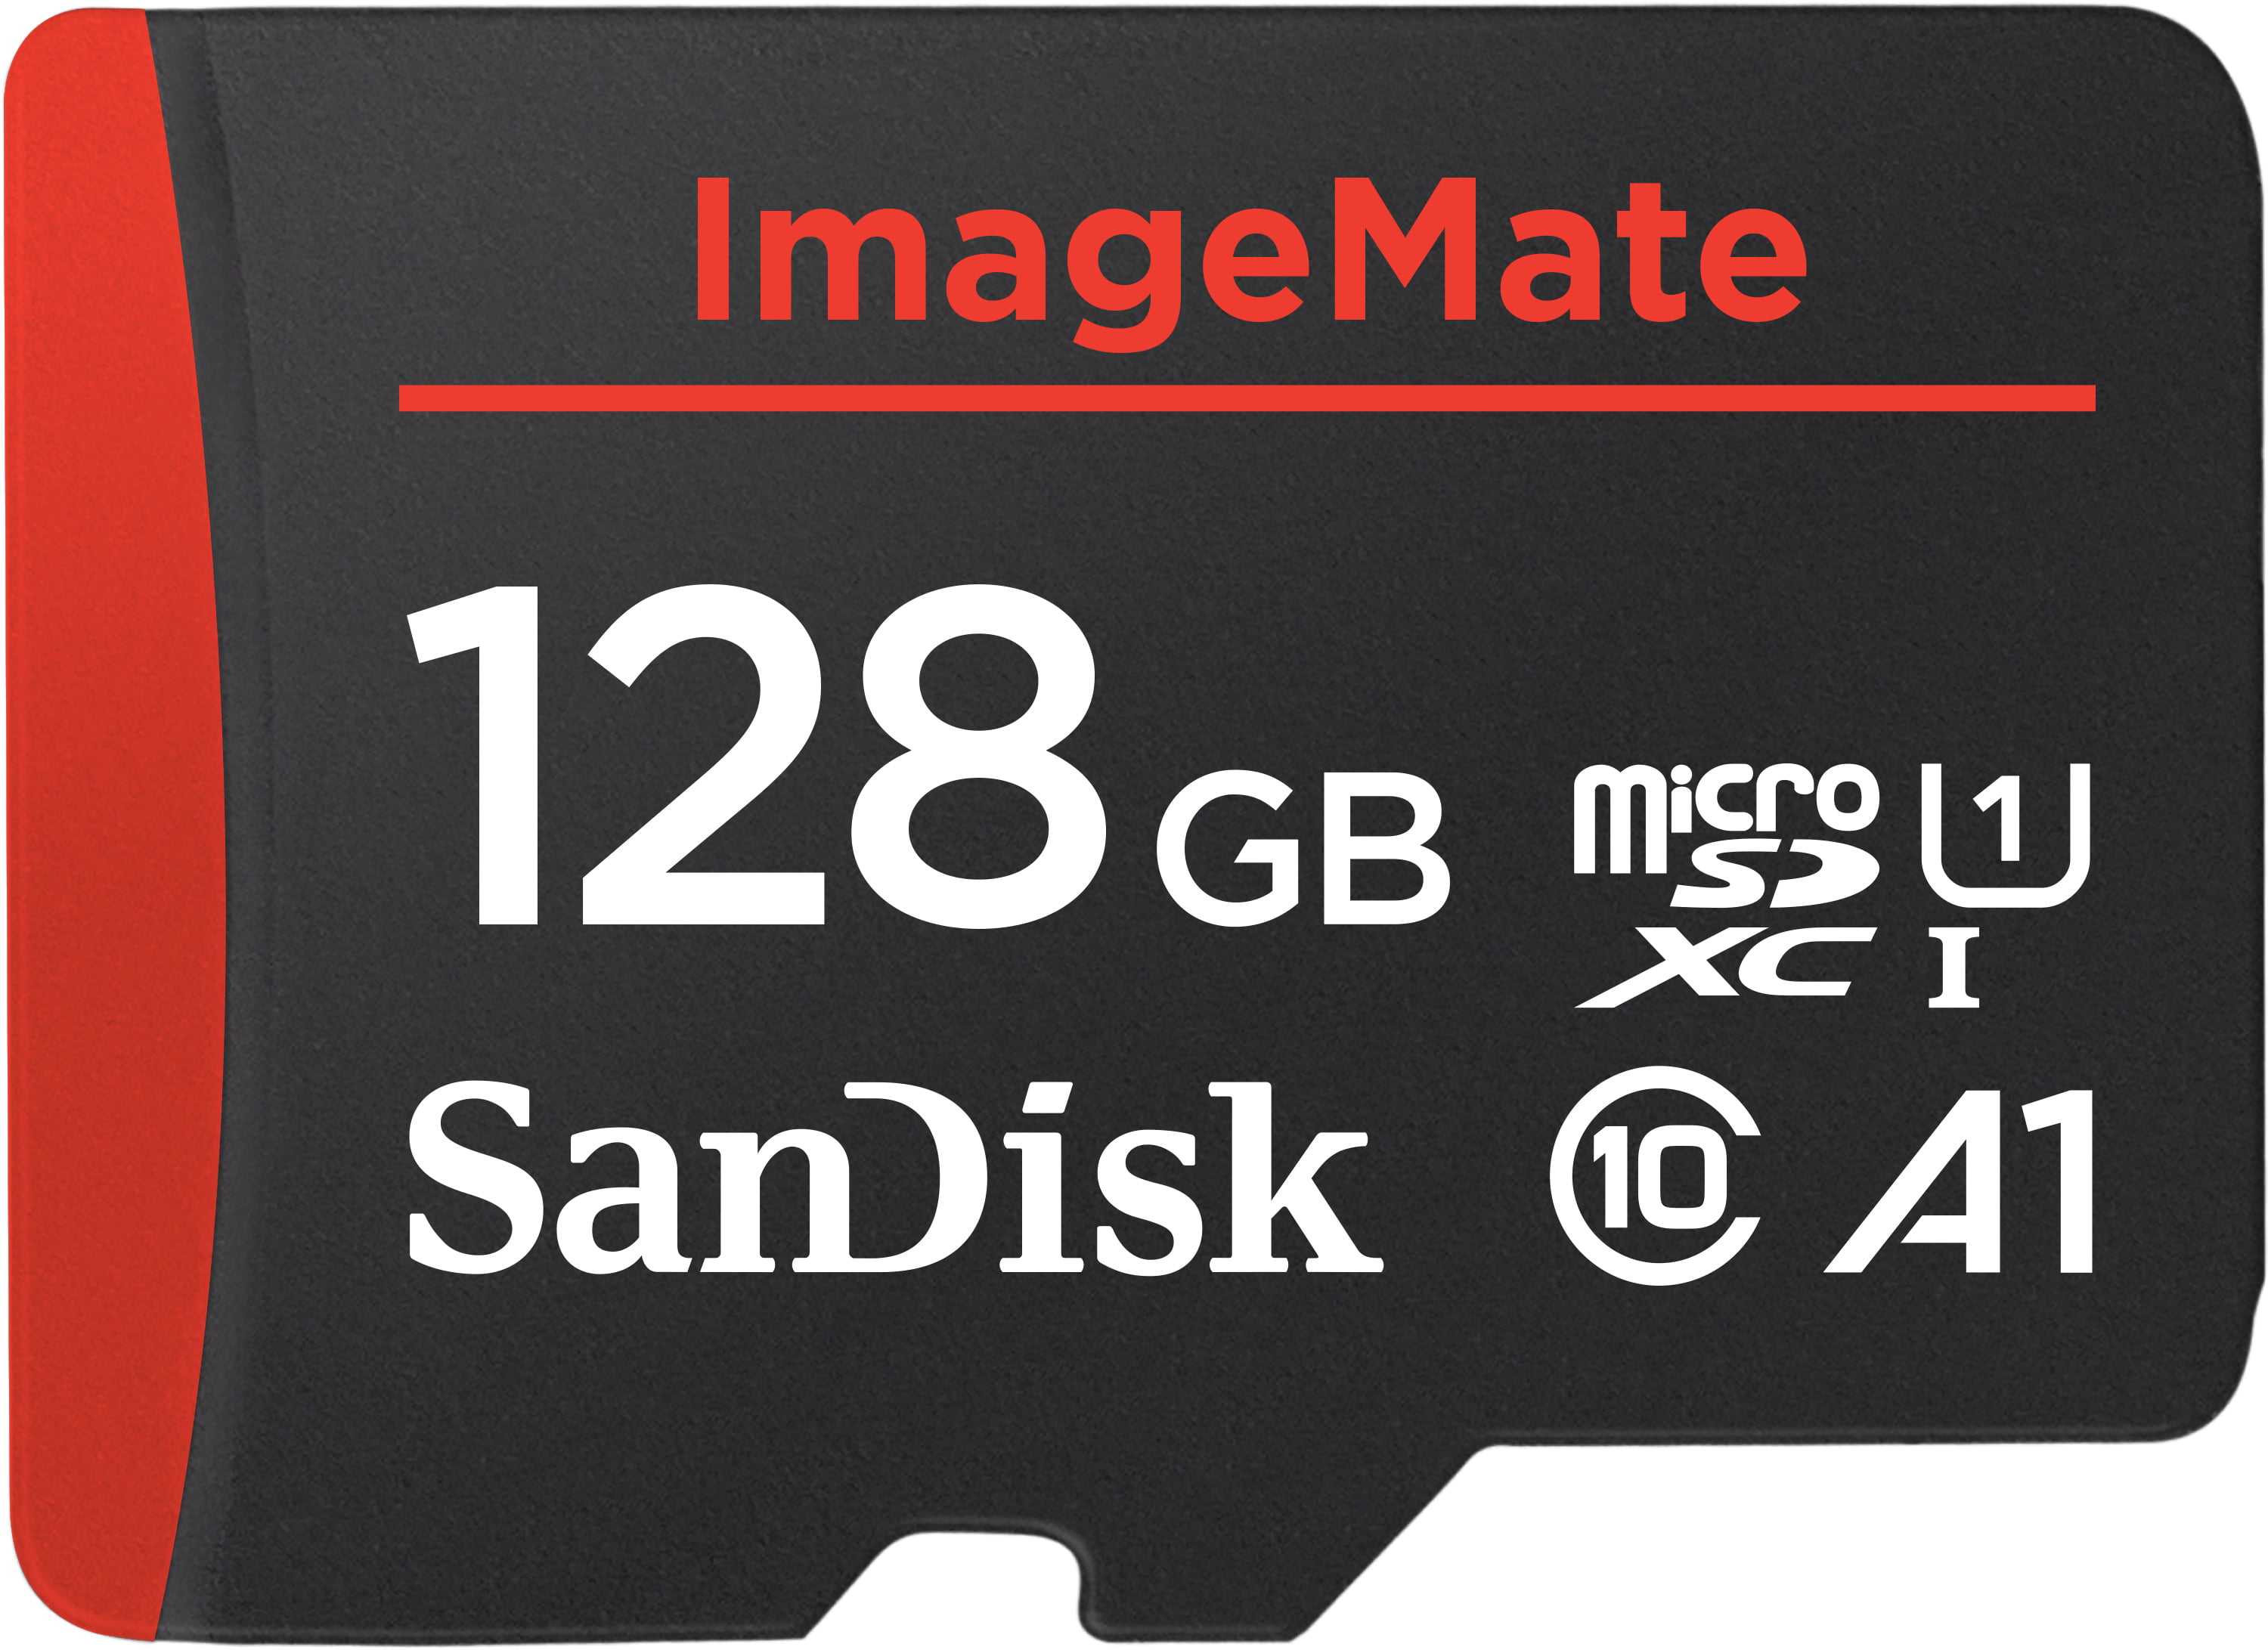 SanDisk 128GB ImageMate microSDXC UHS-1 Memory Card with Adapter - C10, U1, Full HD, A1 Micro SD